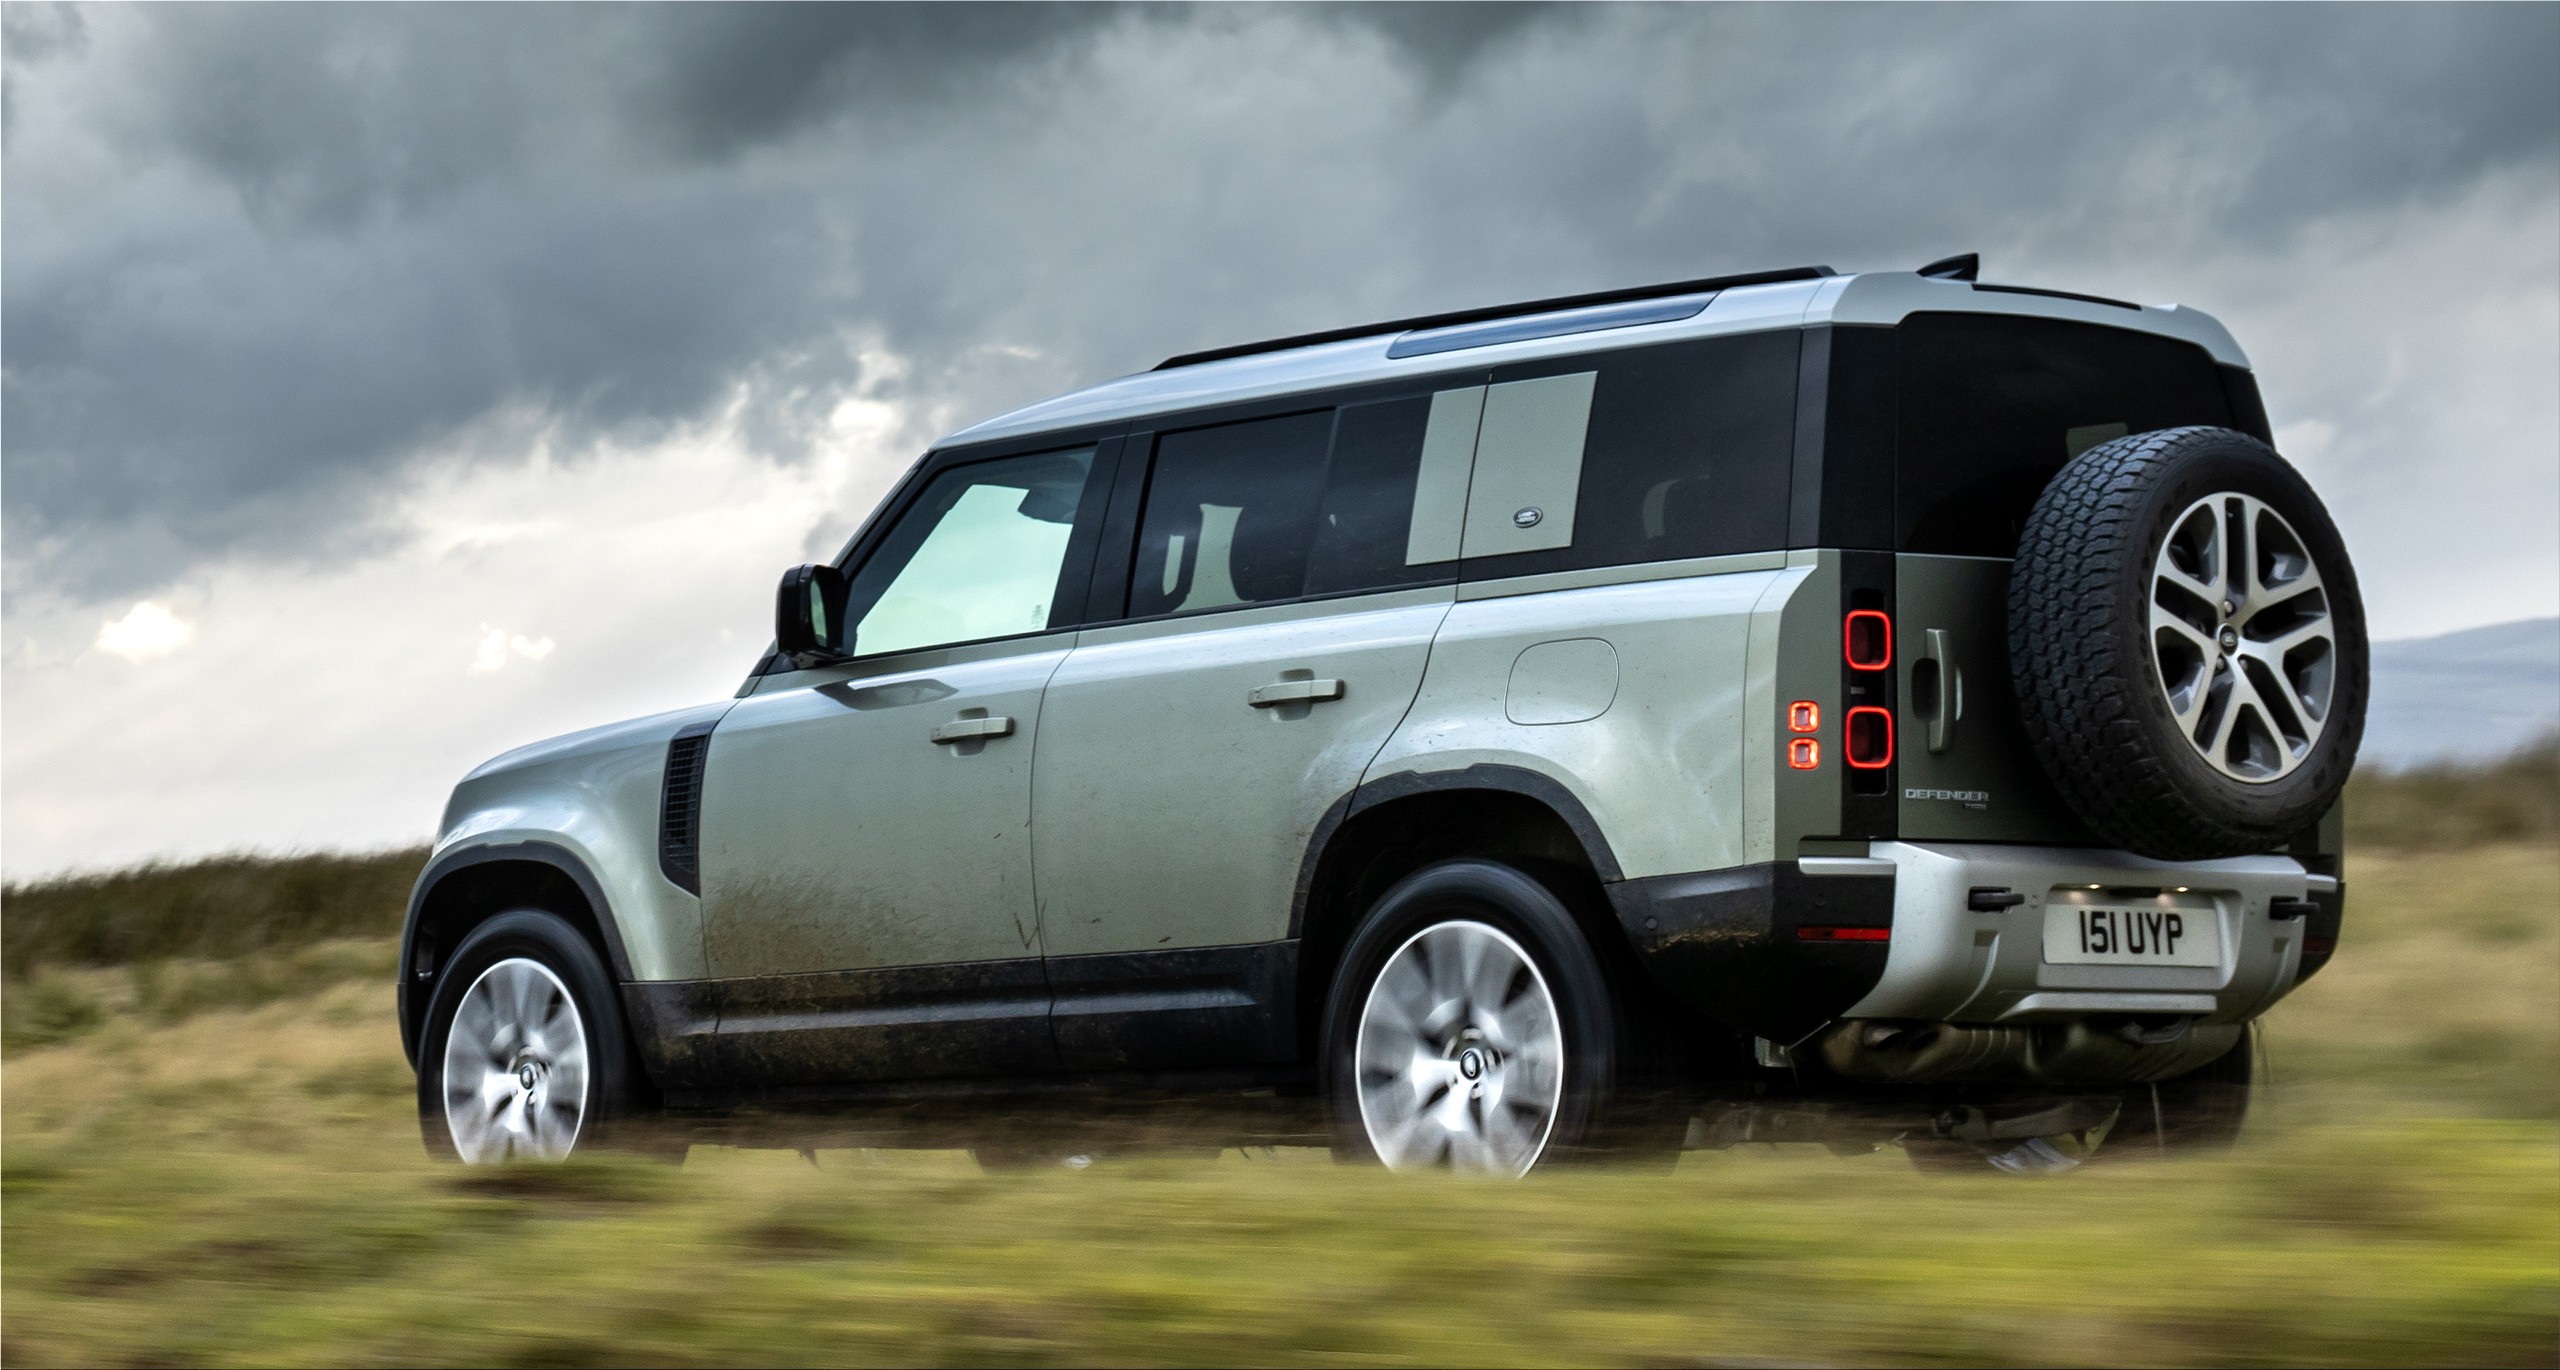 The new Land Rover Defender P400e plug in hybrid with 404 hp Electric Hunter